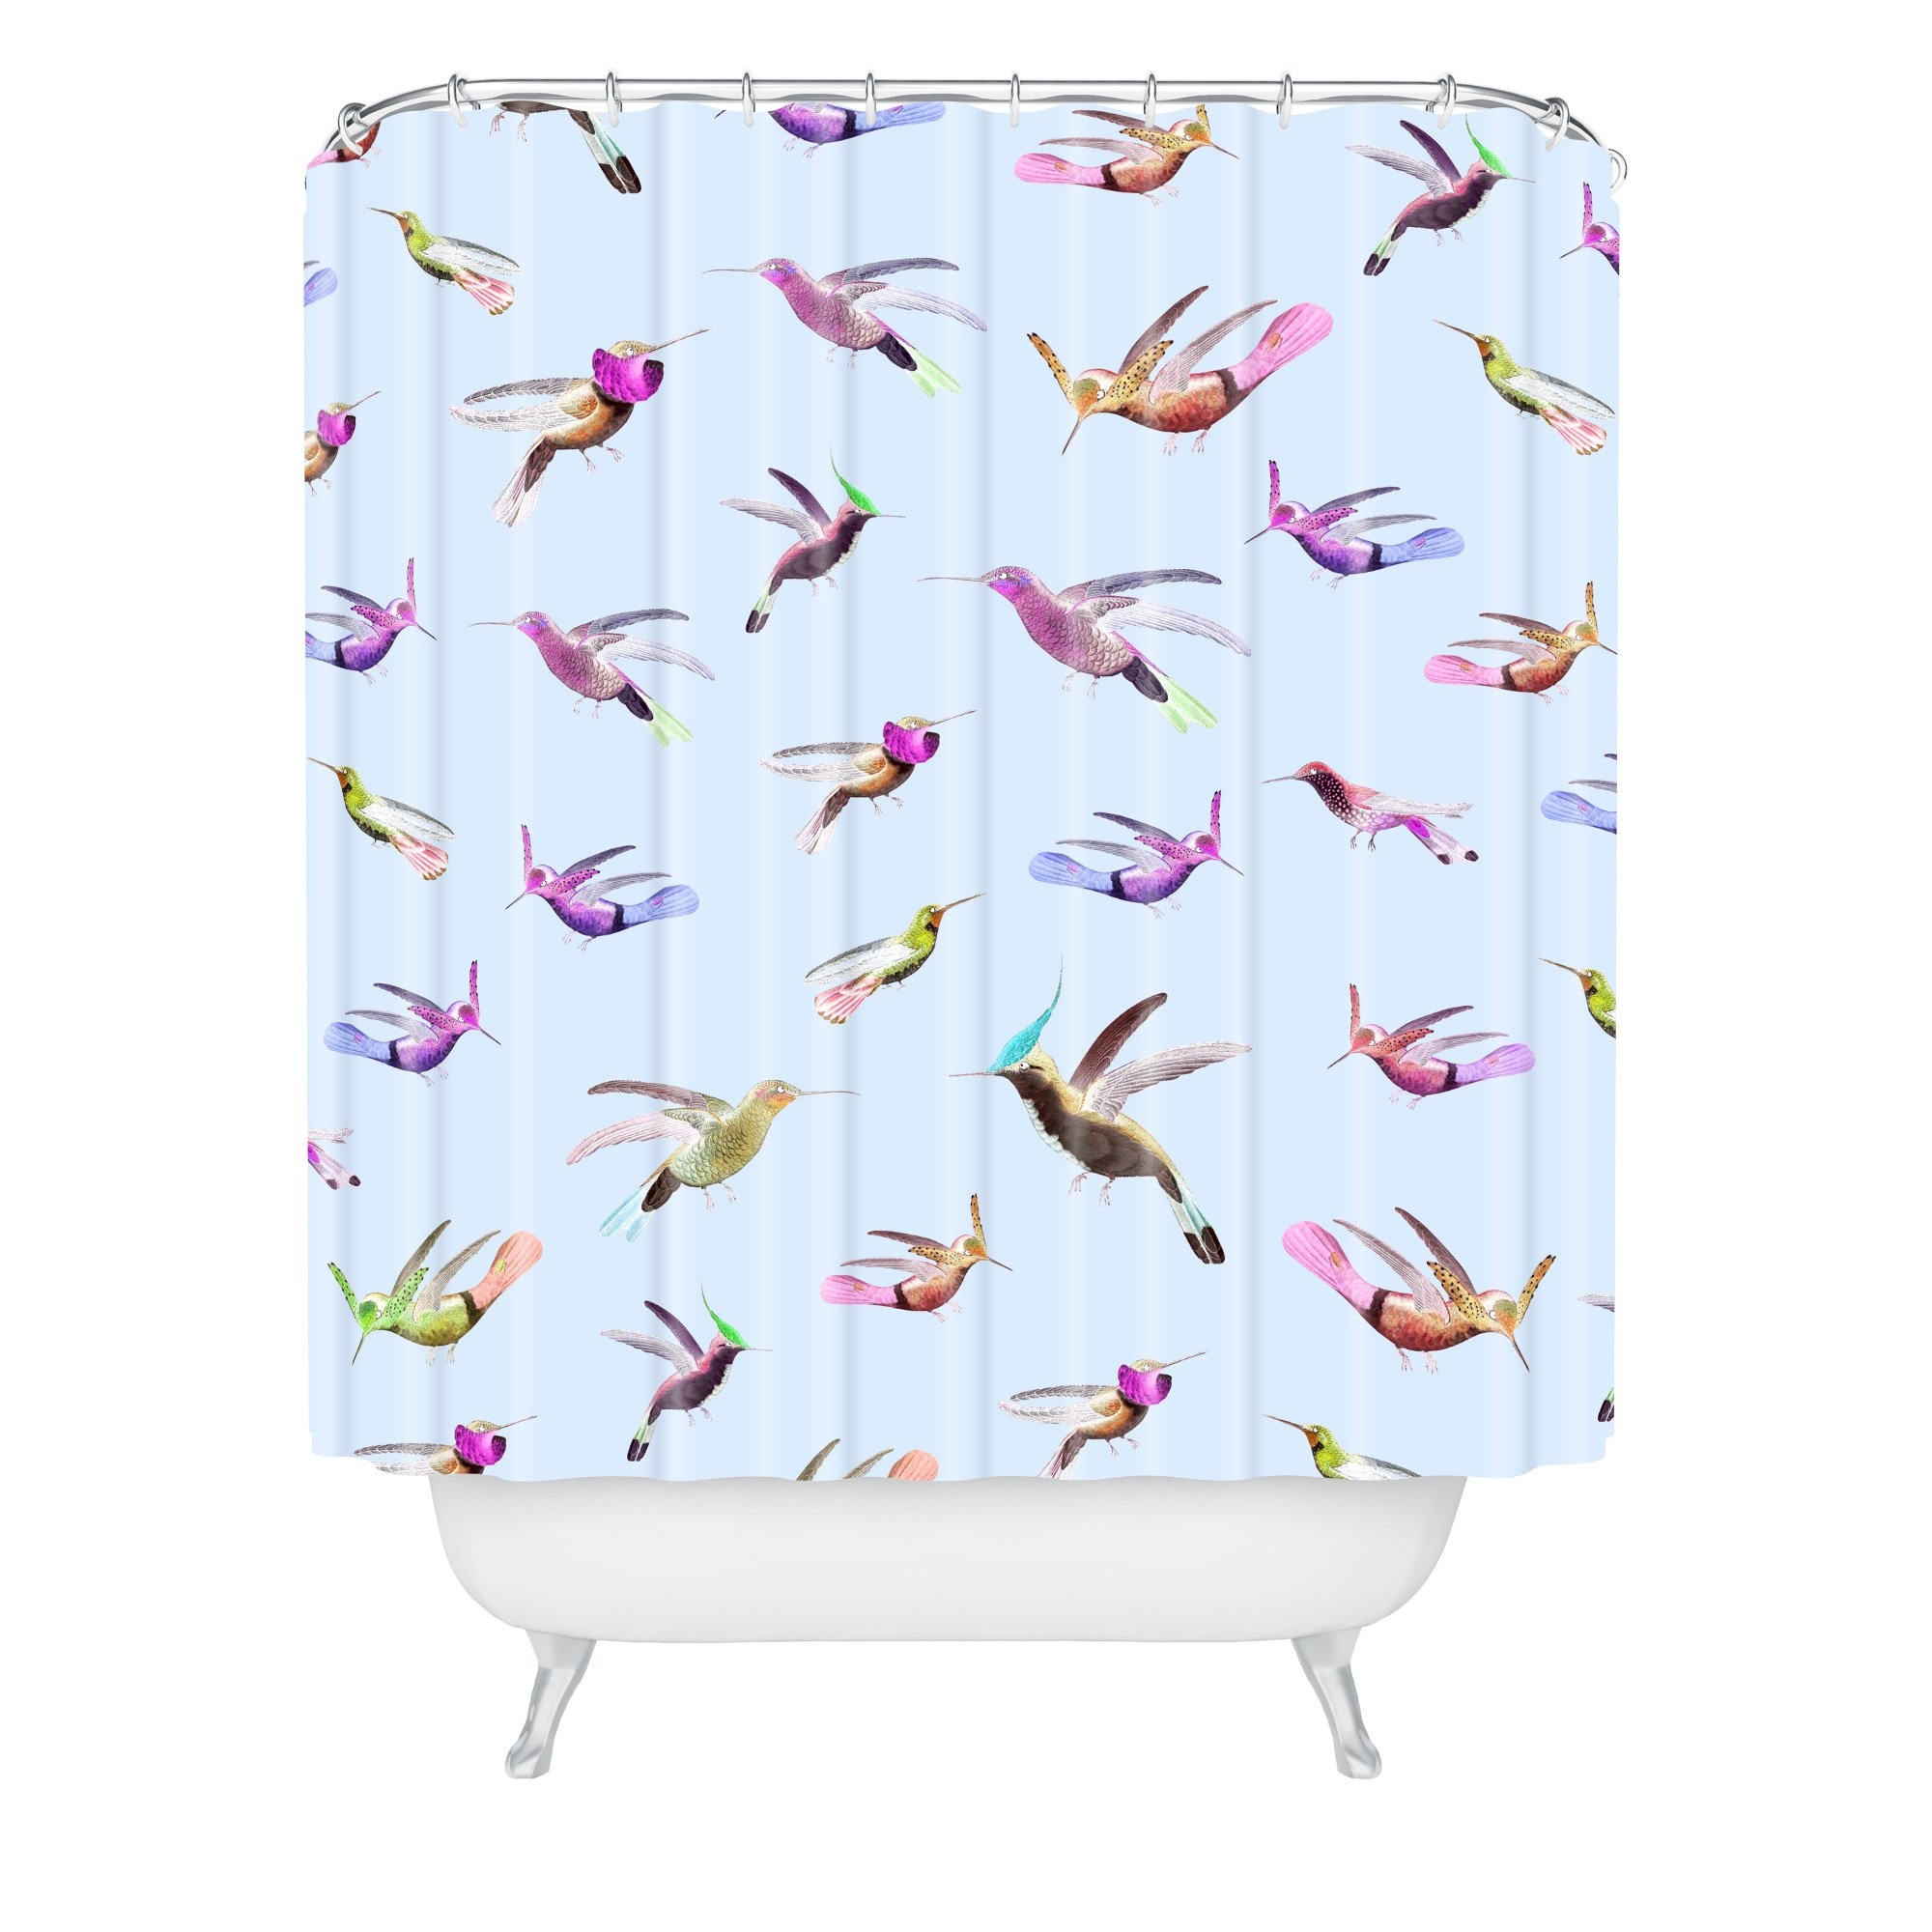 Iveta Abolina Colibri Garden Shower Curtain - Standard 71"x74" with Rings - Image 0